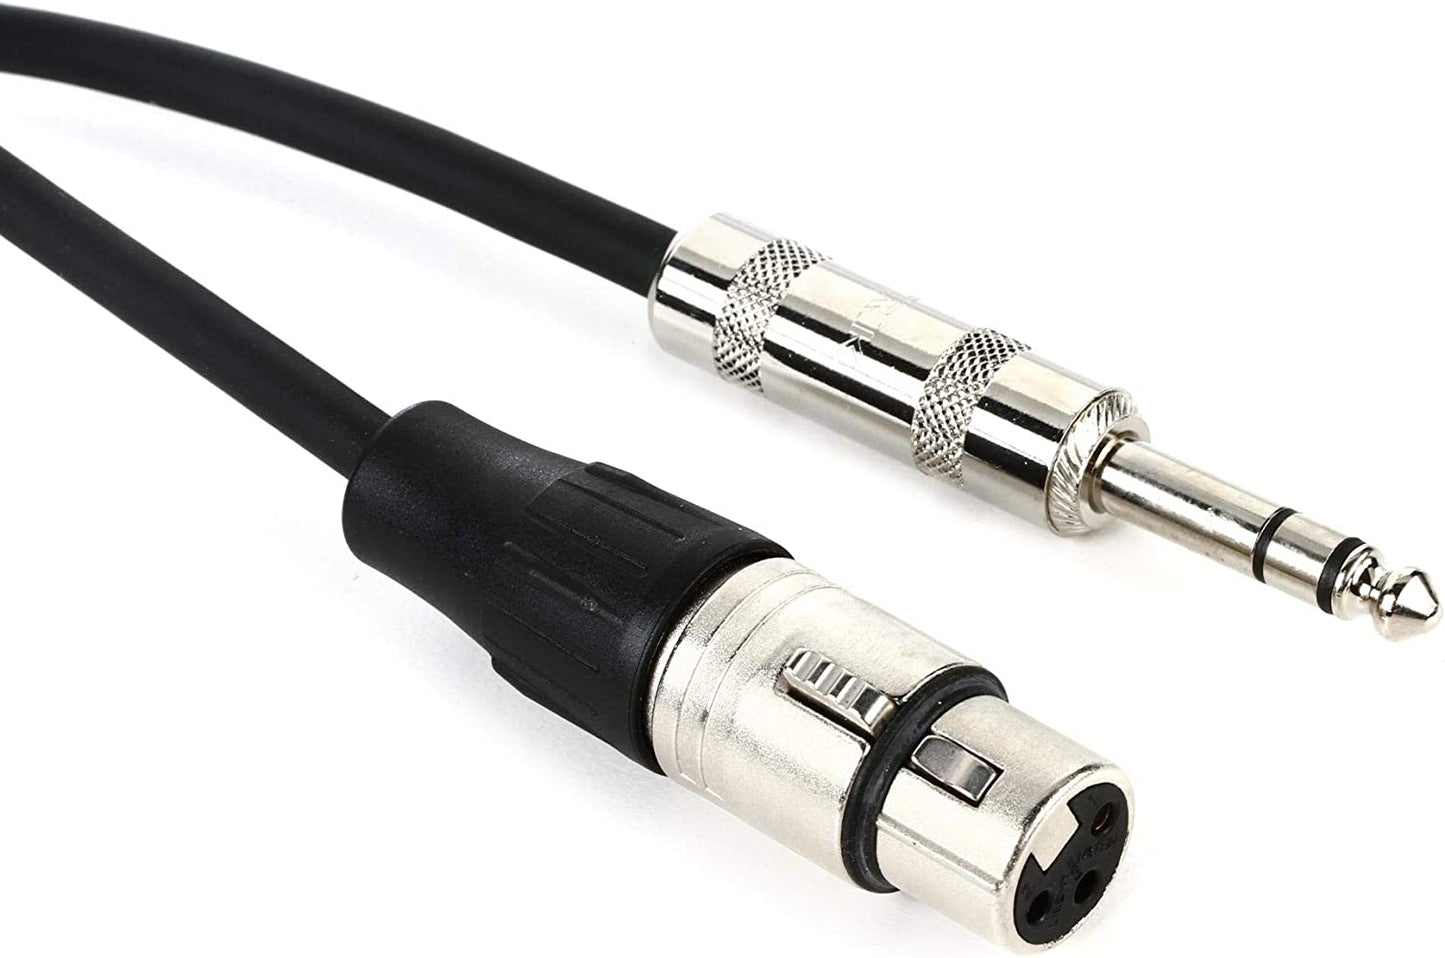 Pro Co BPBQXF-3 Excellines Balanced Patch Cable - XLR Female to TRS Male - 3ft - ProCo - 3 Foot